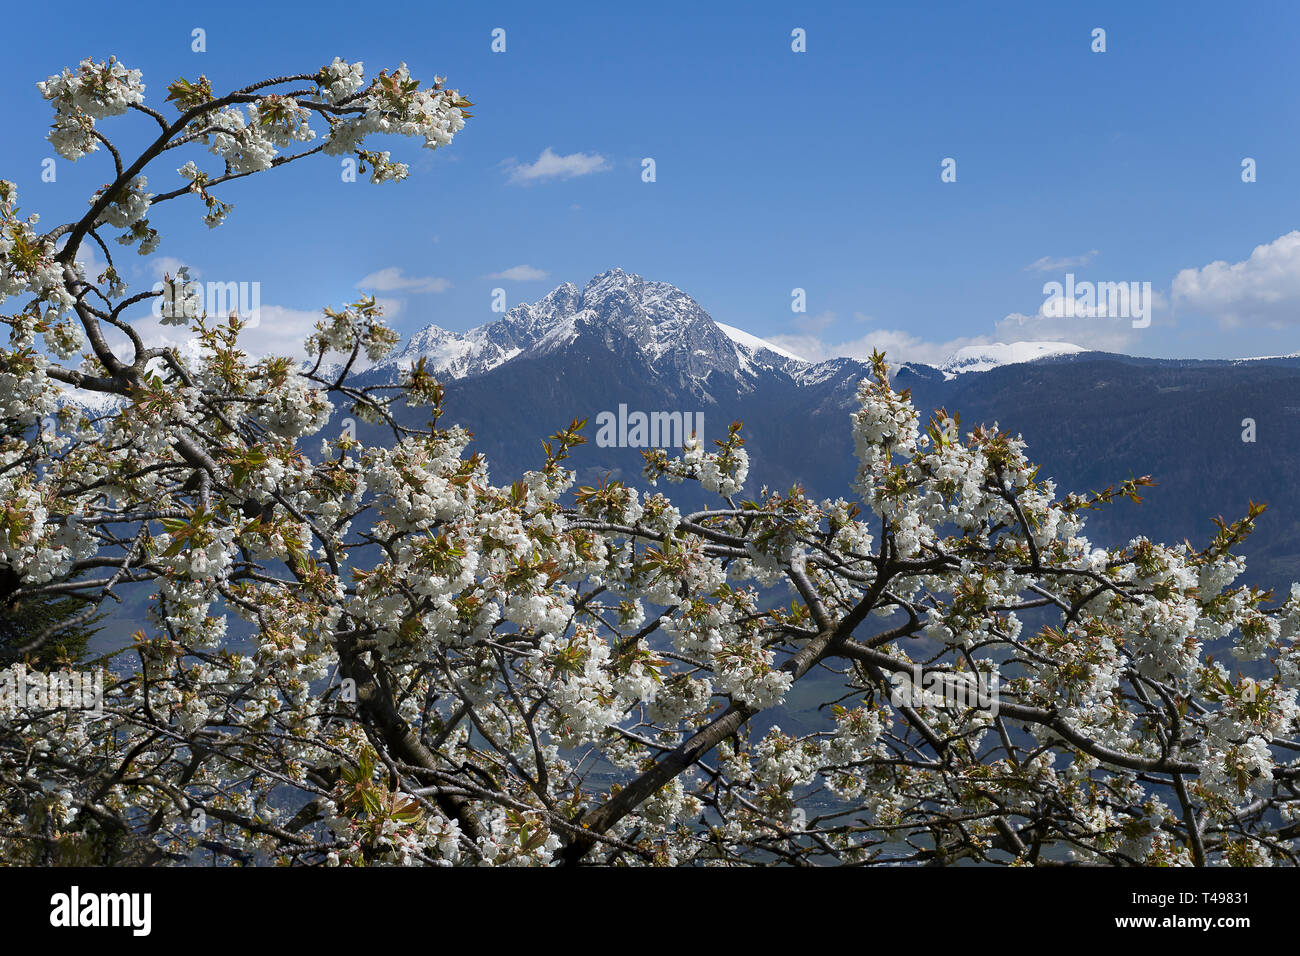 Spring is here - White blossoms in front of snow covered mountains Stock Photo